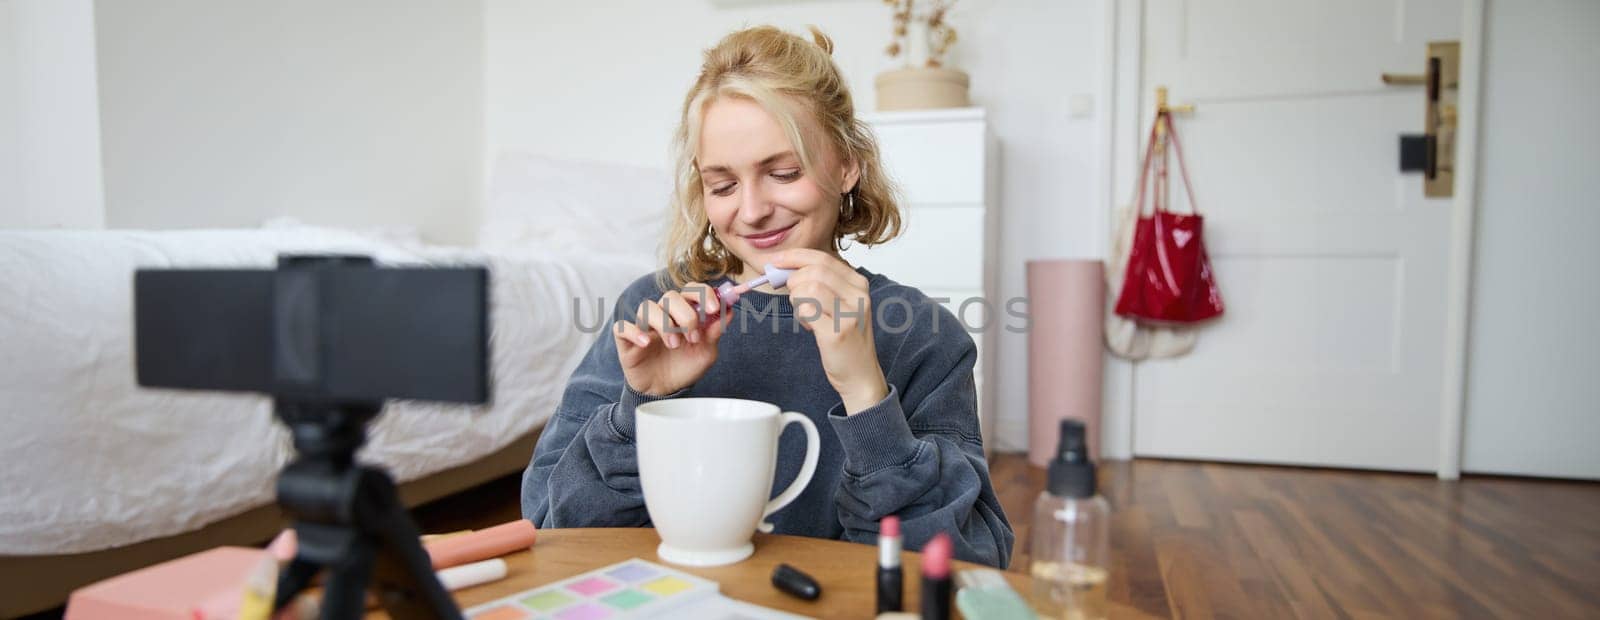 Image of happy, beautiful young social media influencer, female vlogger records a video on digital camera, tutorial on how to put makeup, getting ready for going out, talking to followers.